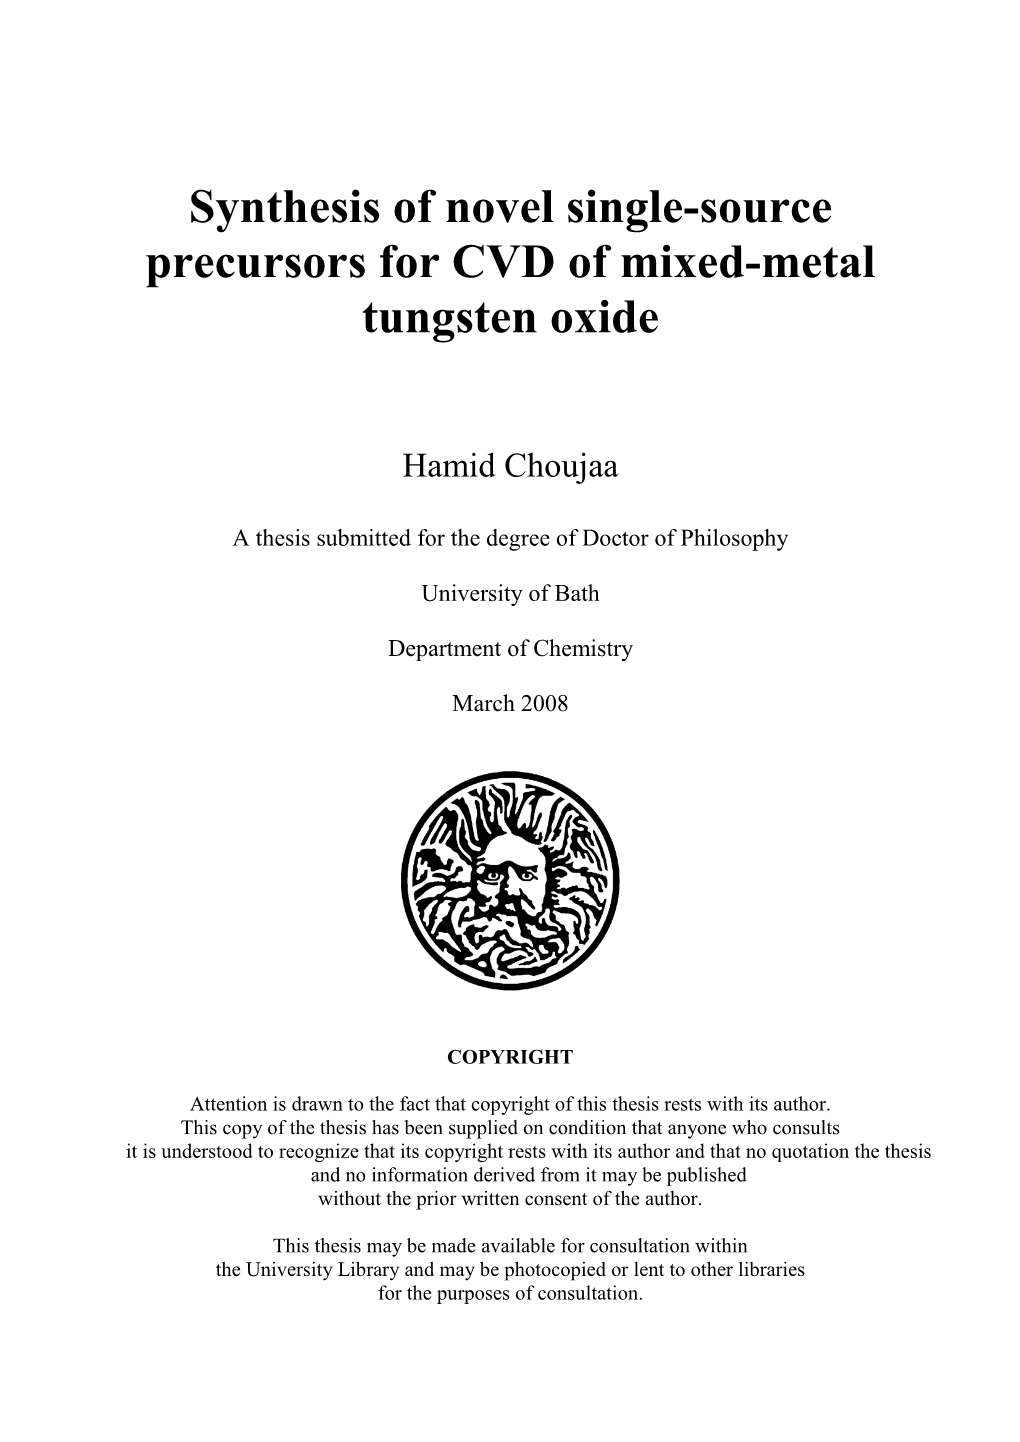 Synthesis of Novel Single-Source Precursors for CVD of Mixed-Metal Tungsten Oxide